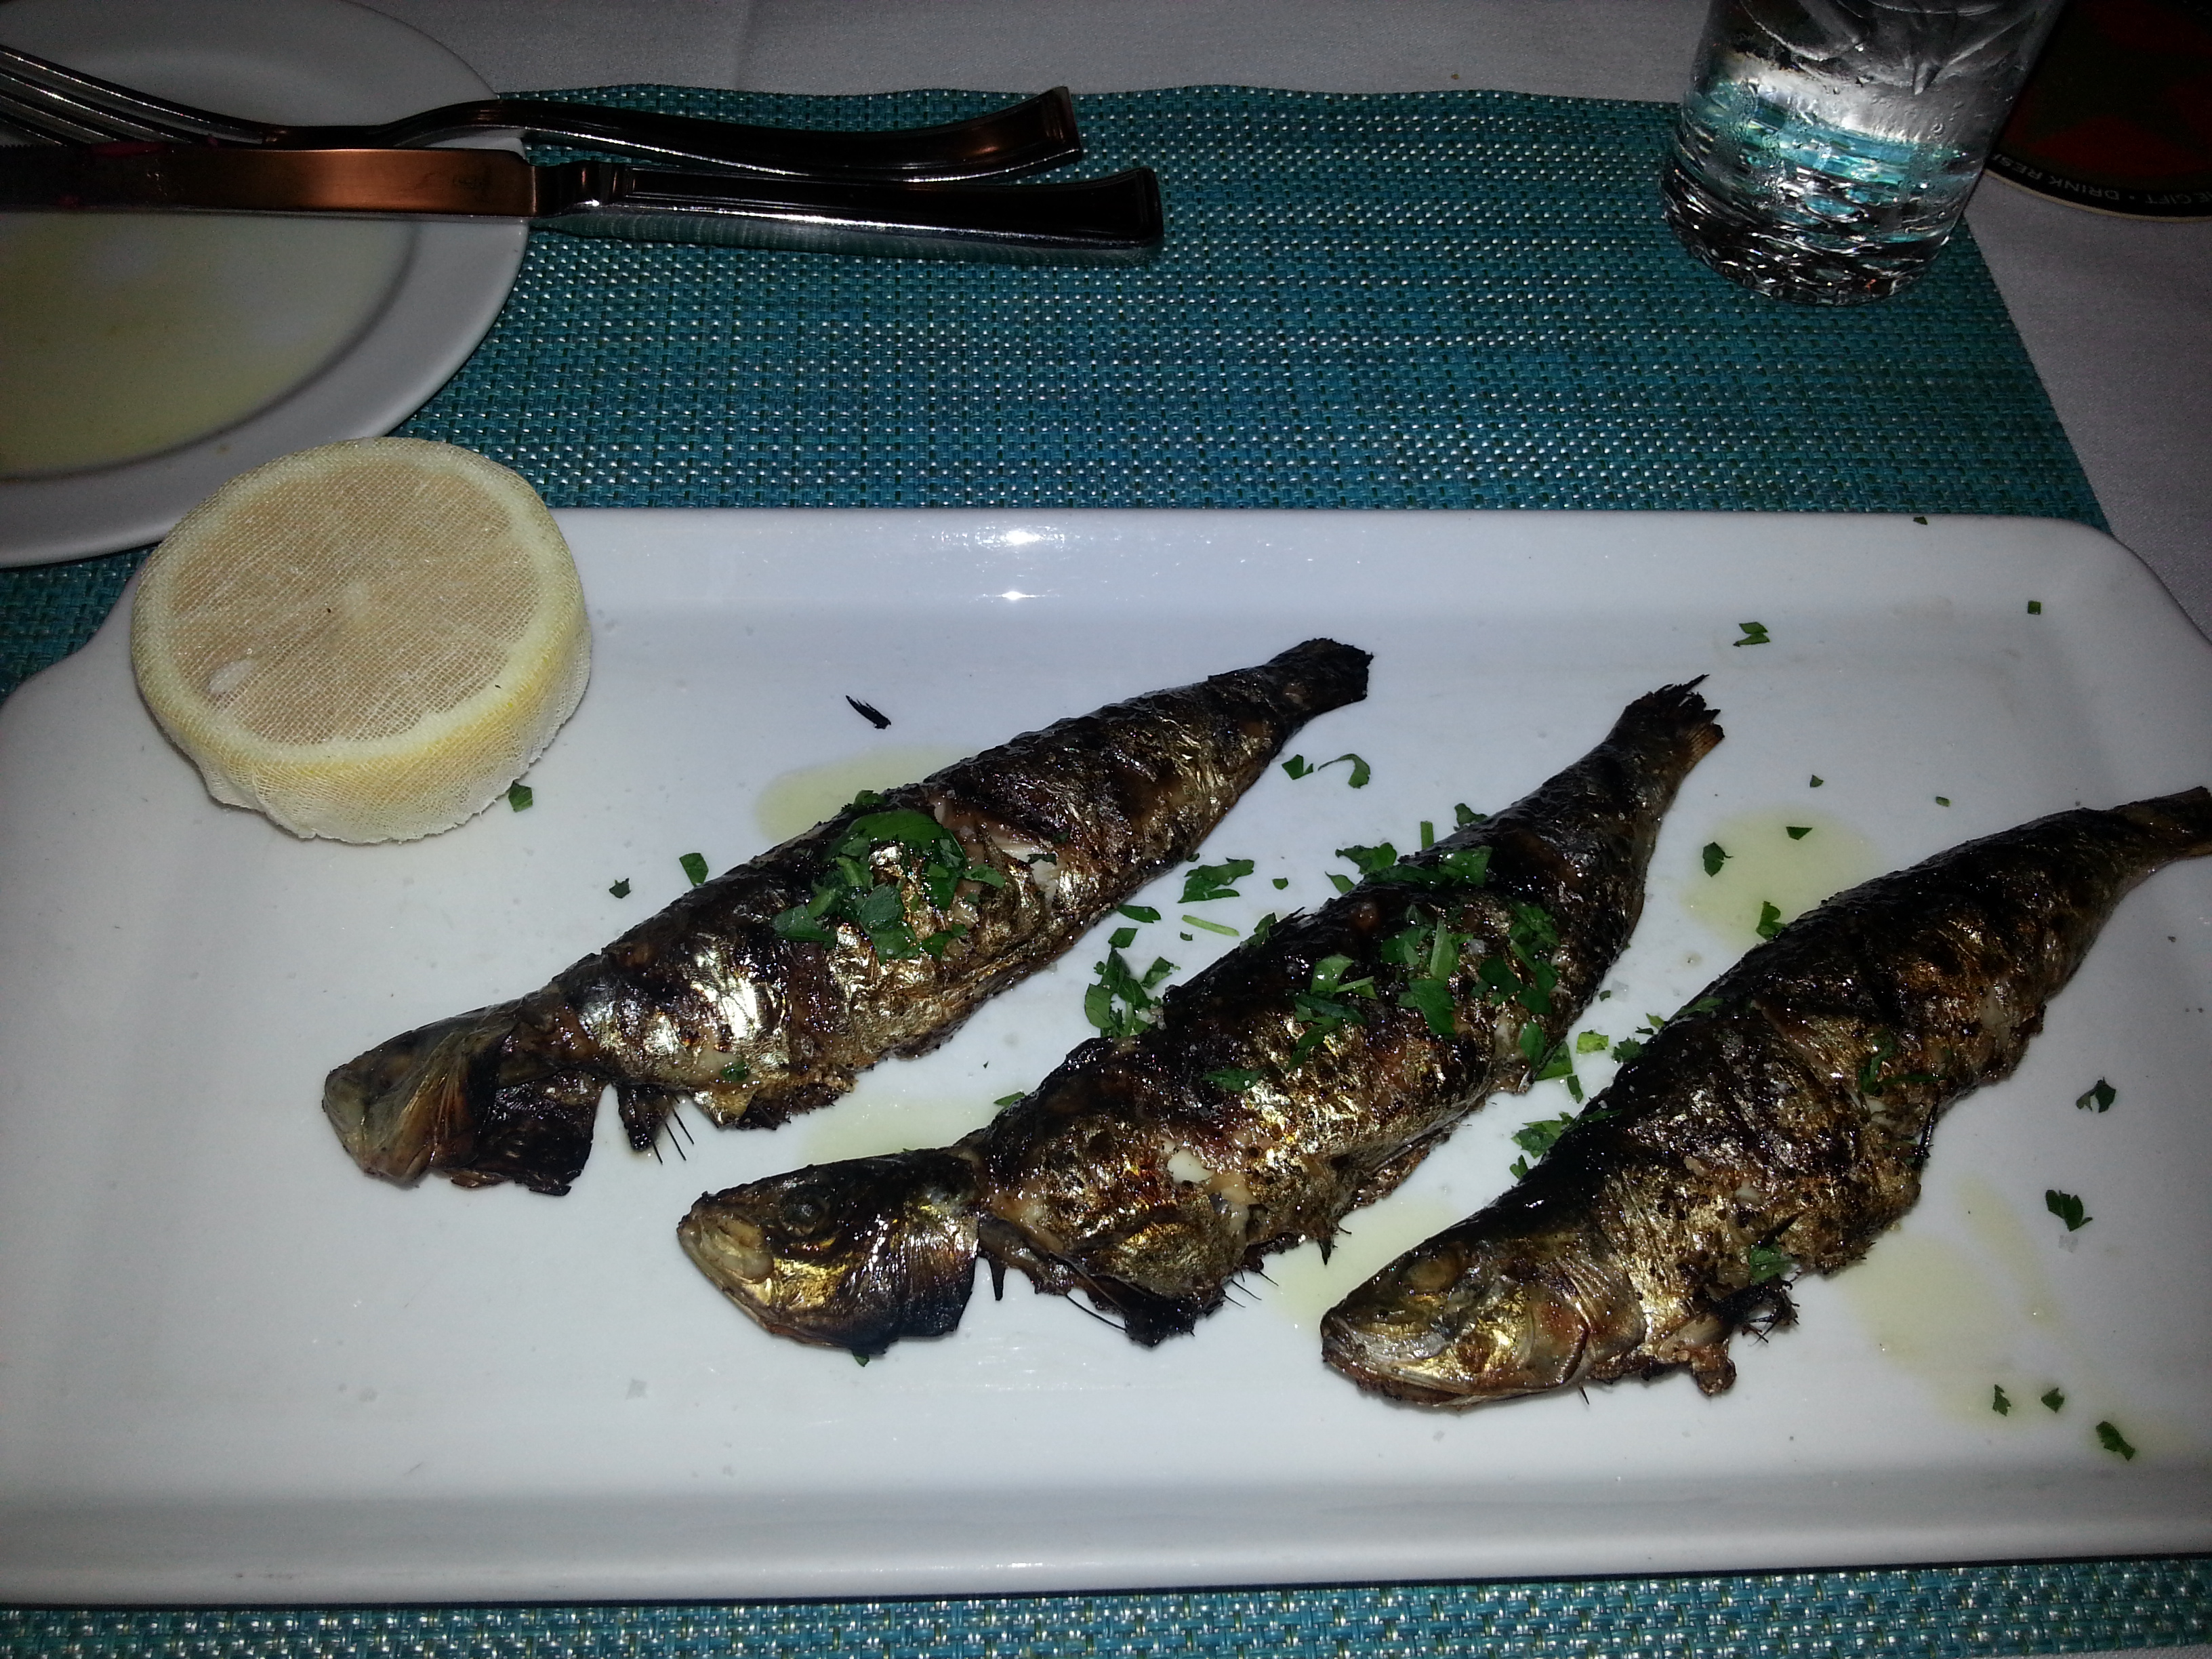 I love seafood. These are some sardines I ordered from a restaurant. It looks fancy, but this dish is very simple: dressed sardines grilled with lemon and a sprinkle of parsley.